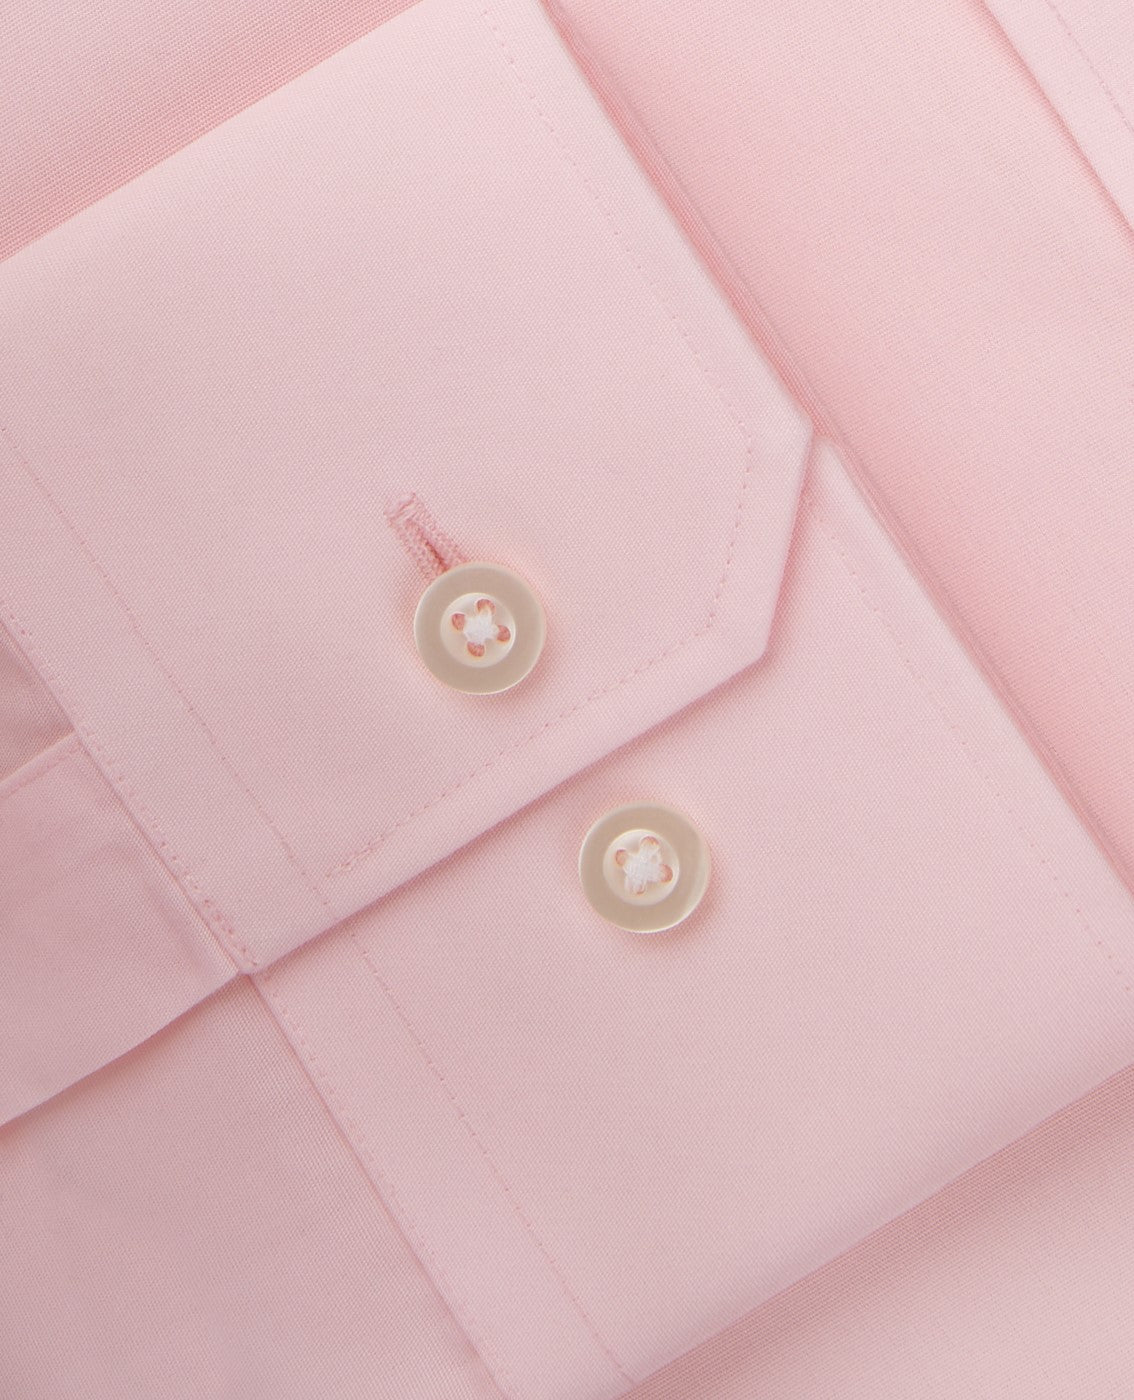 Non-Iron Fitted Pink Shirt